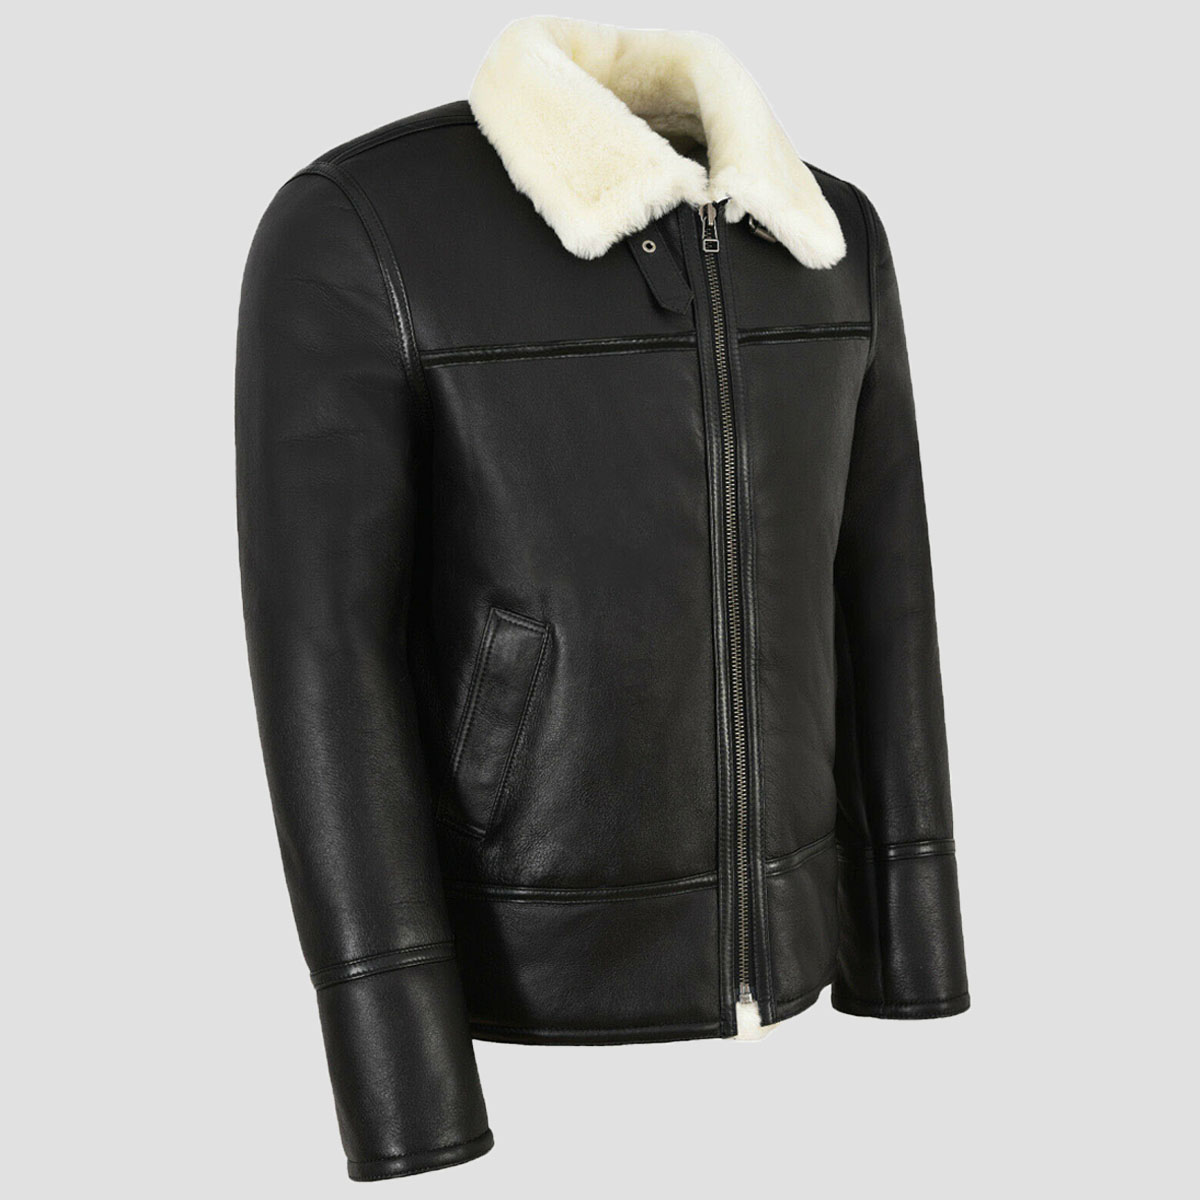 B-3 Black and White Leather Bomber Jacket - The Vintage Leather